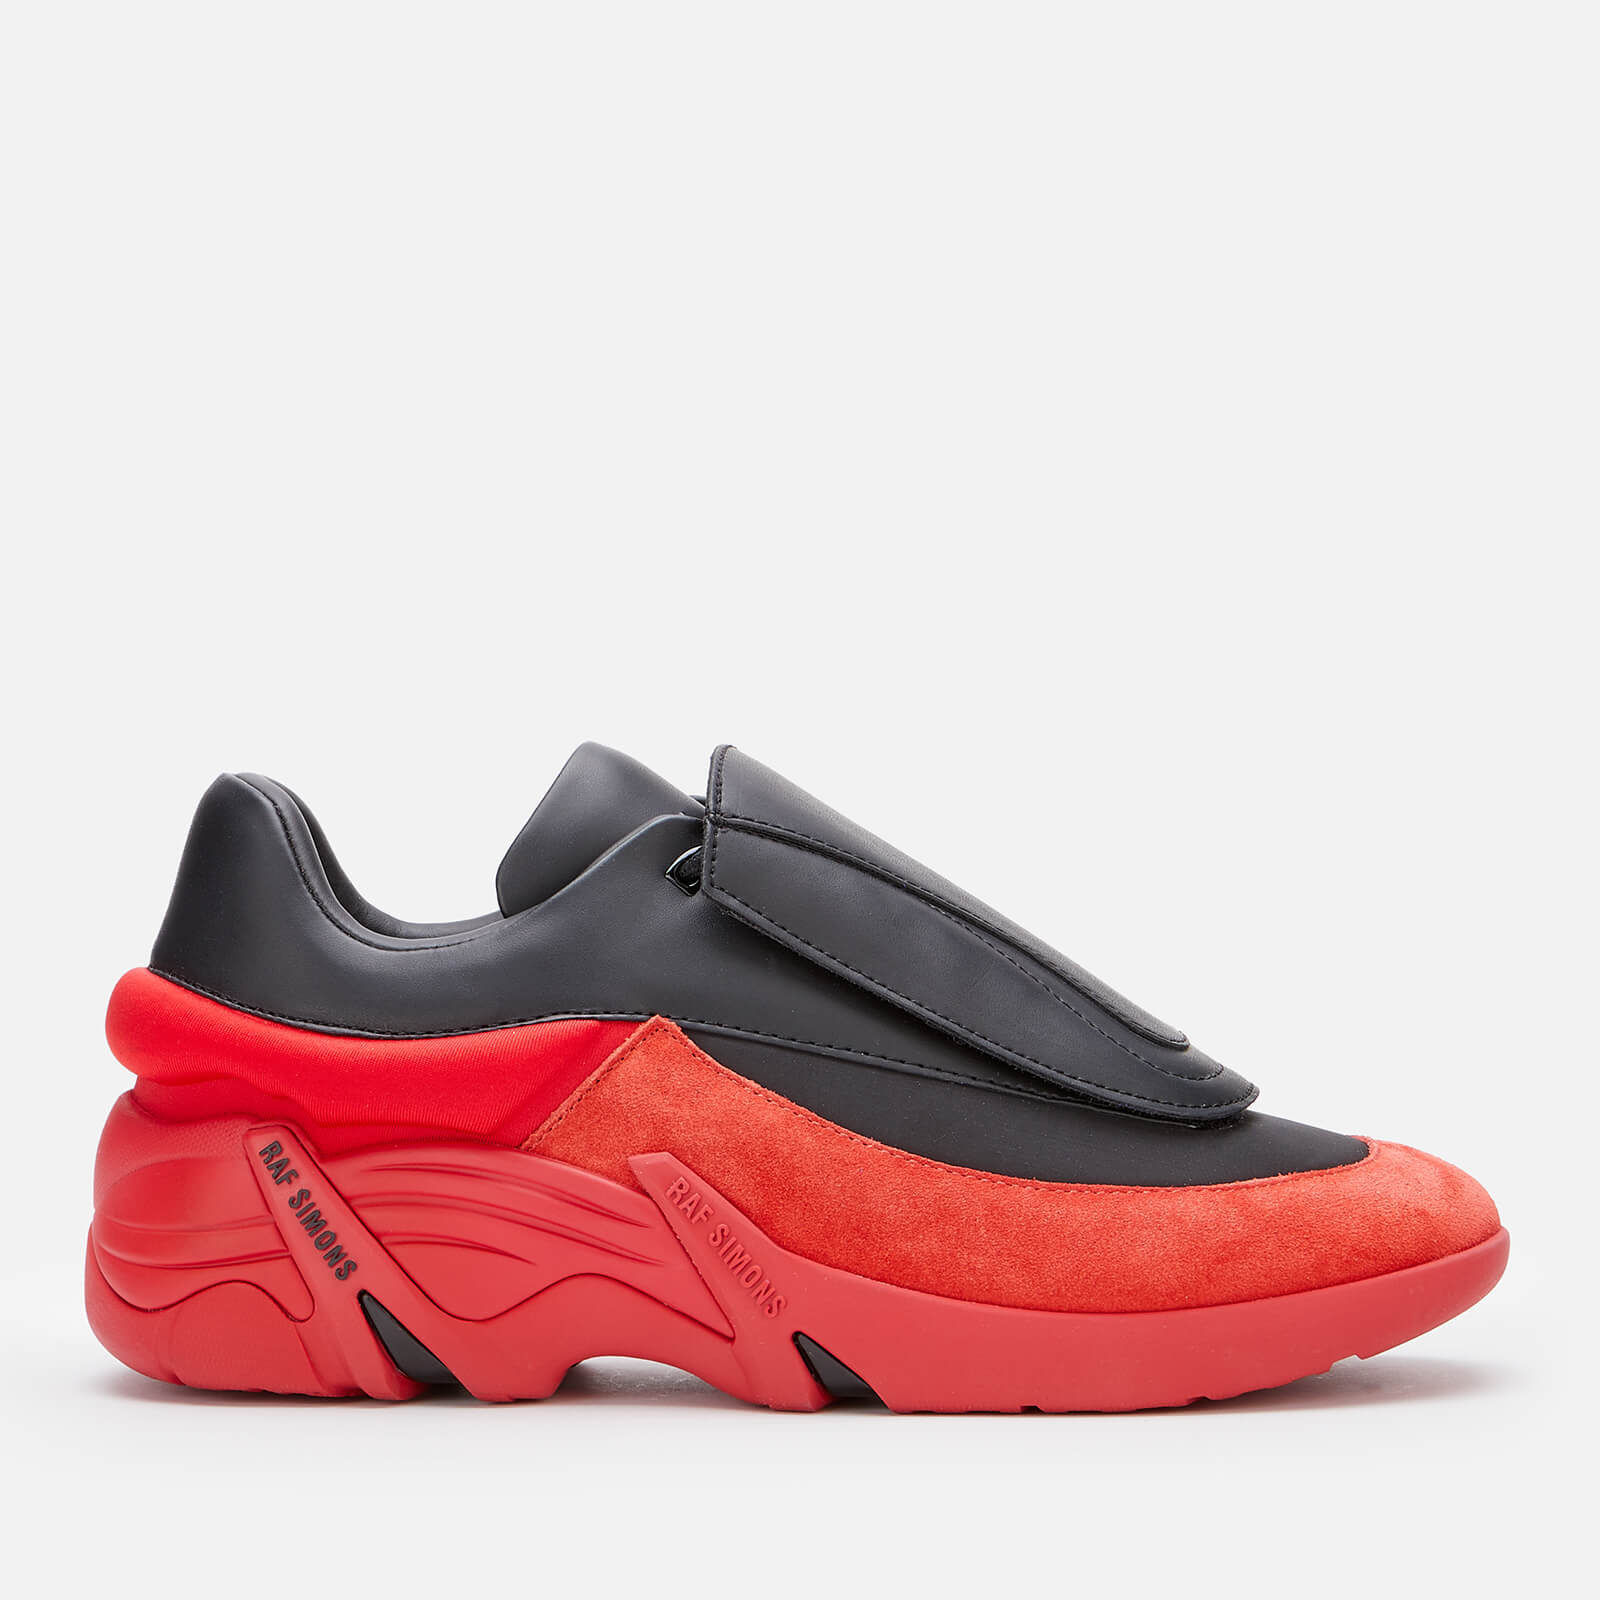 Raf Simons Men's Antei Leather Trainers - Black/Red - UK 7